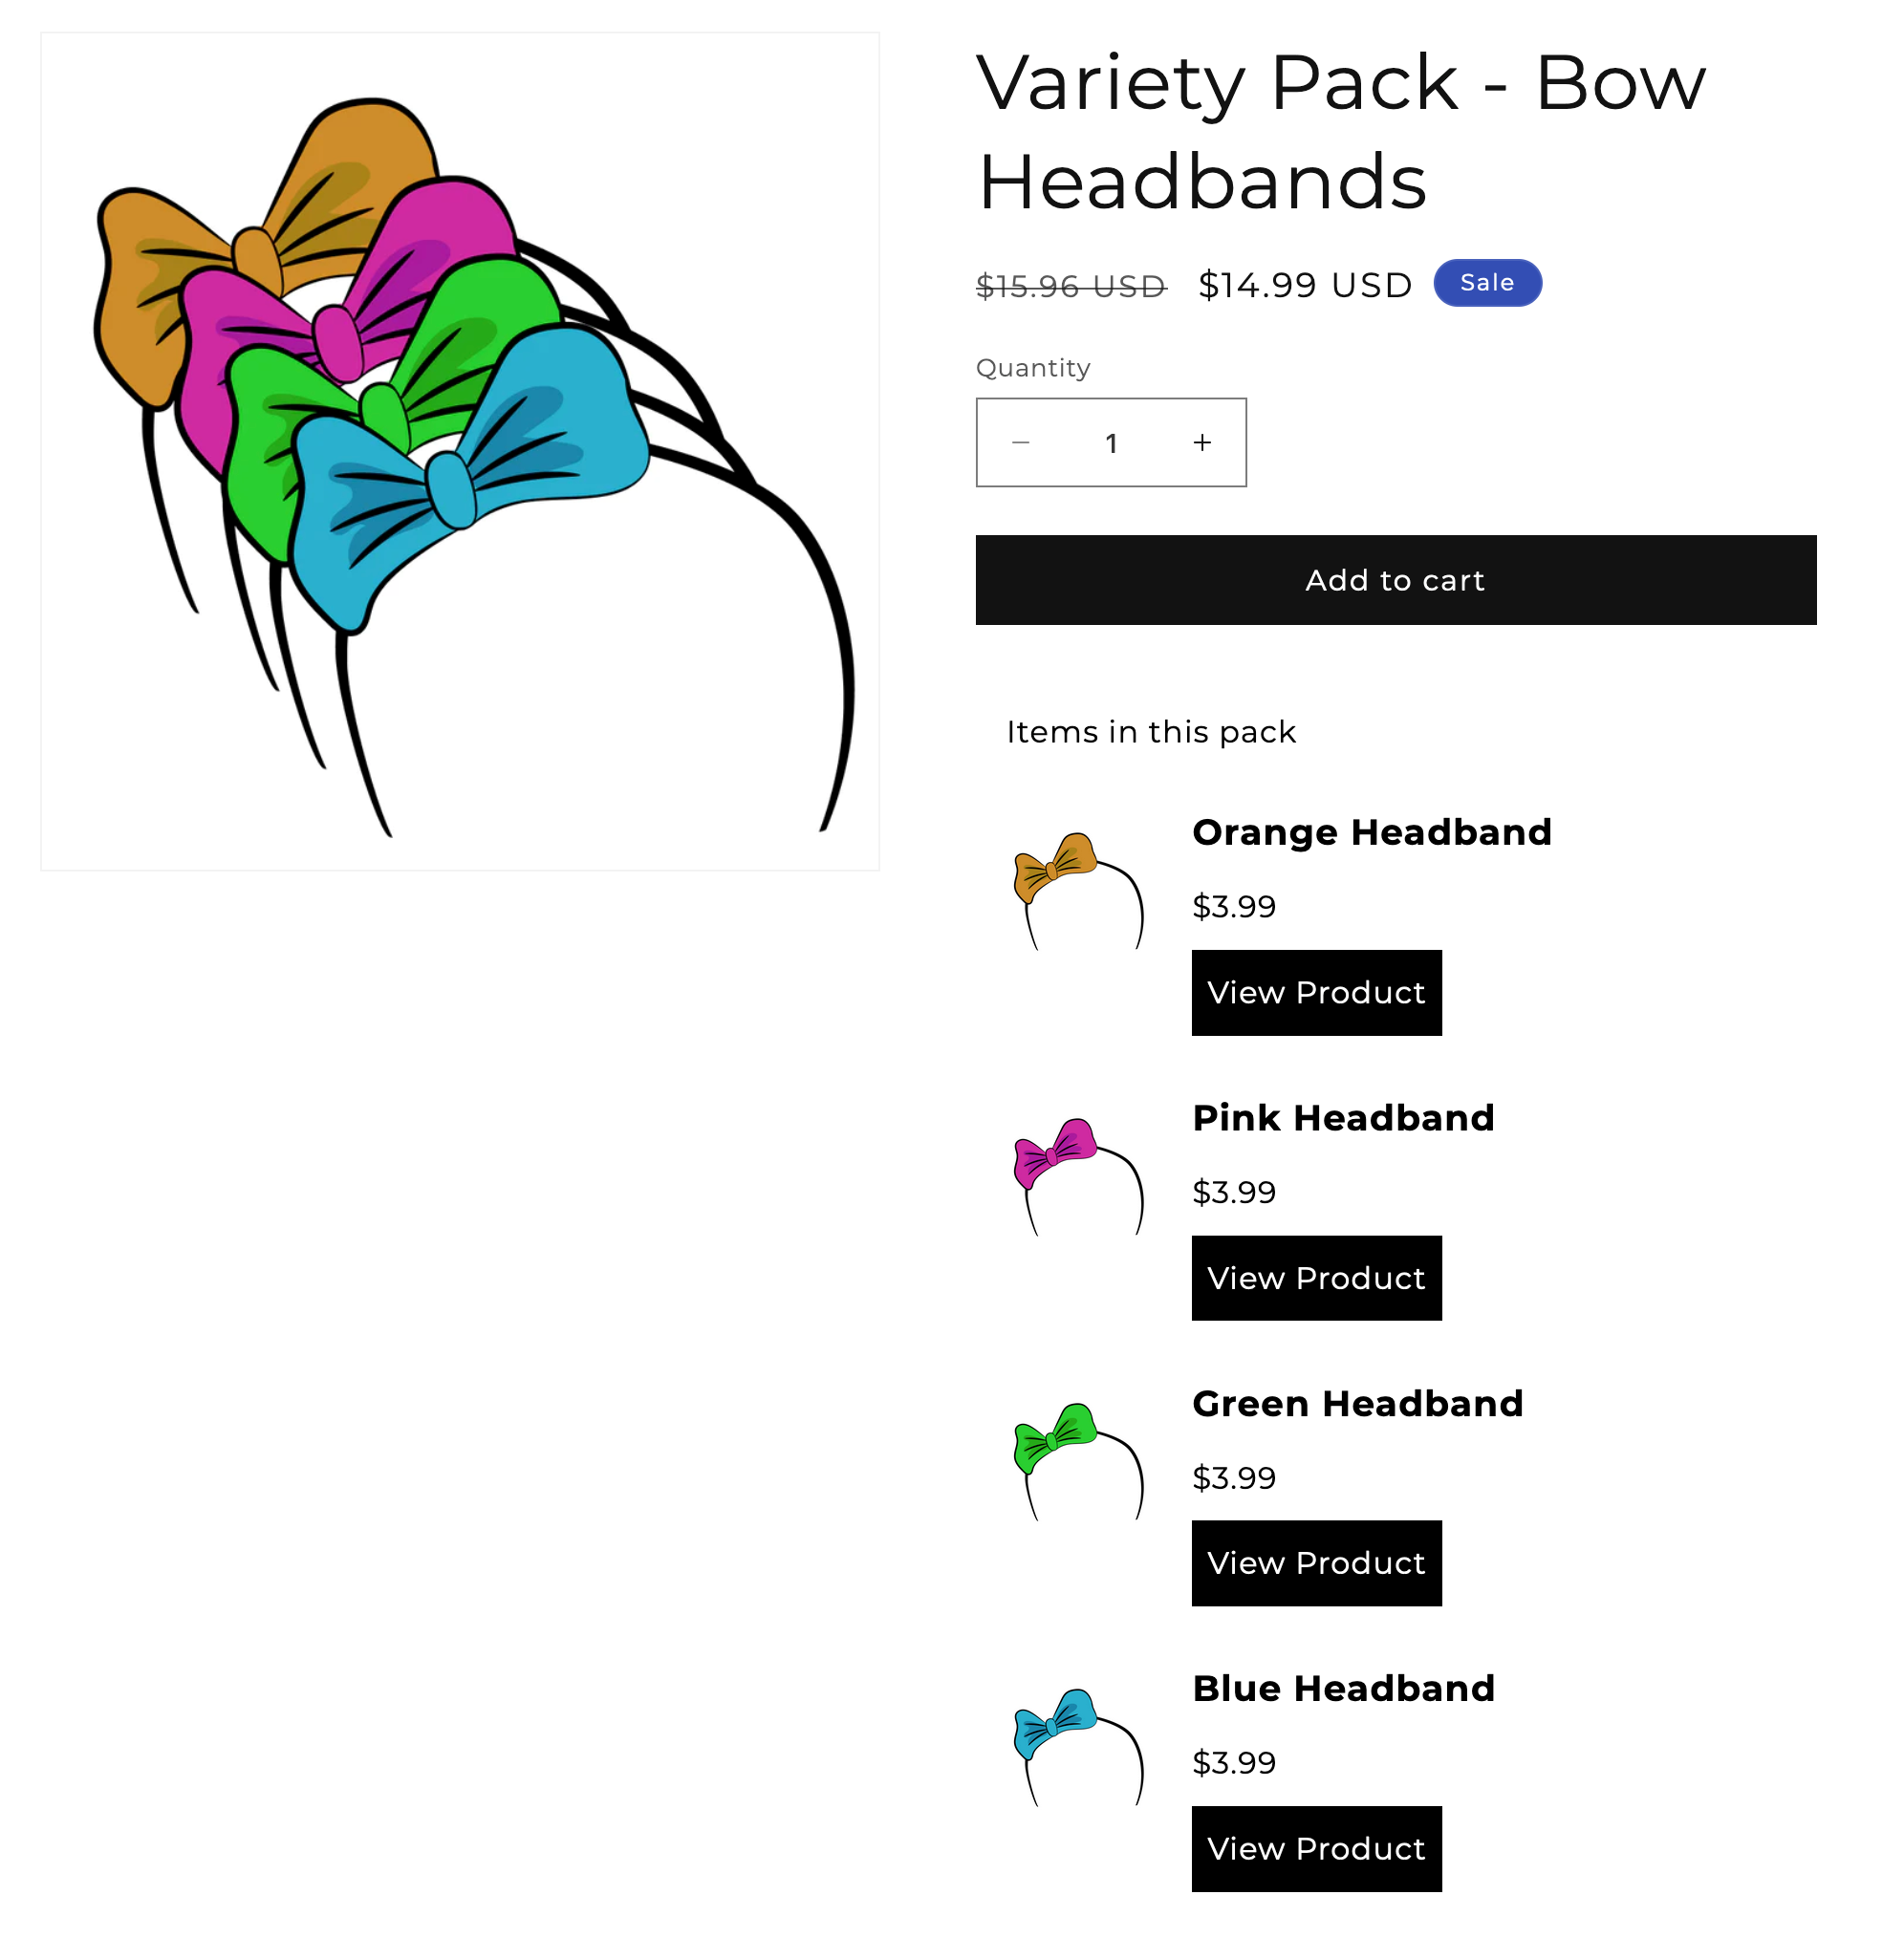 A variety pack of Bow Headbands example linked to individual products included in the variety pack.